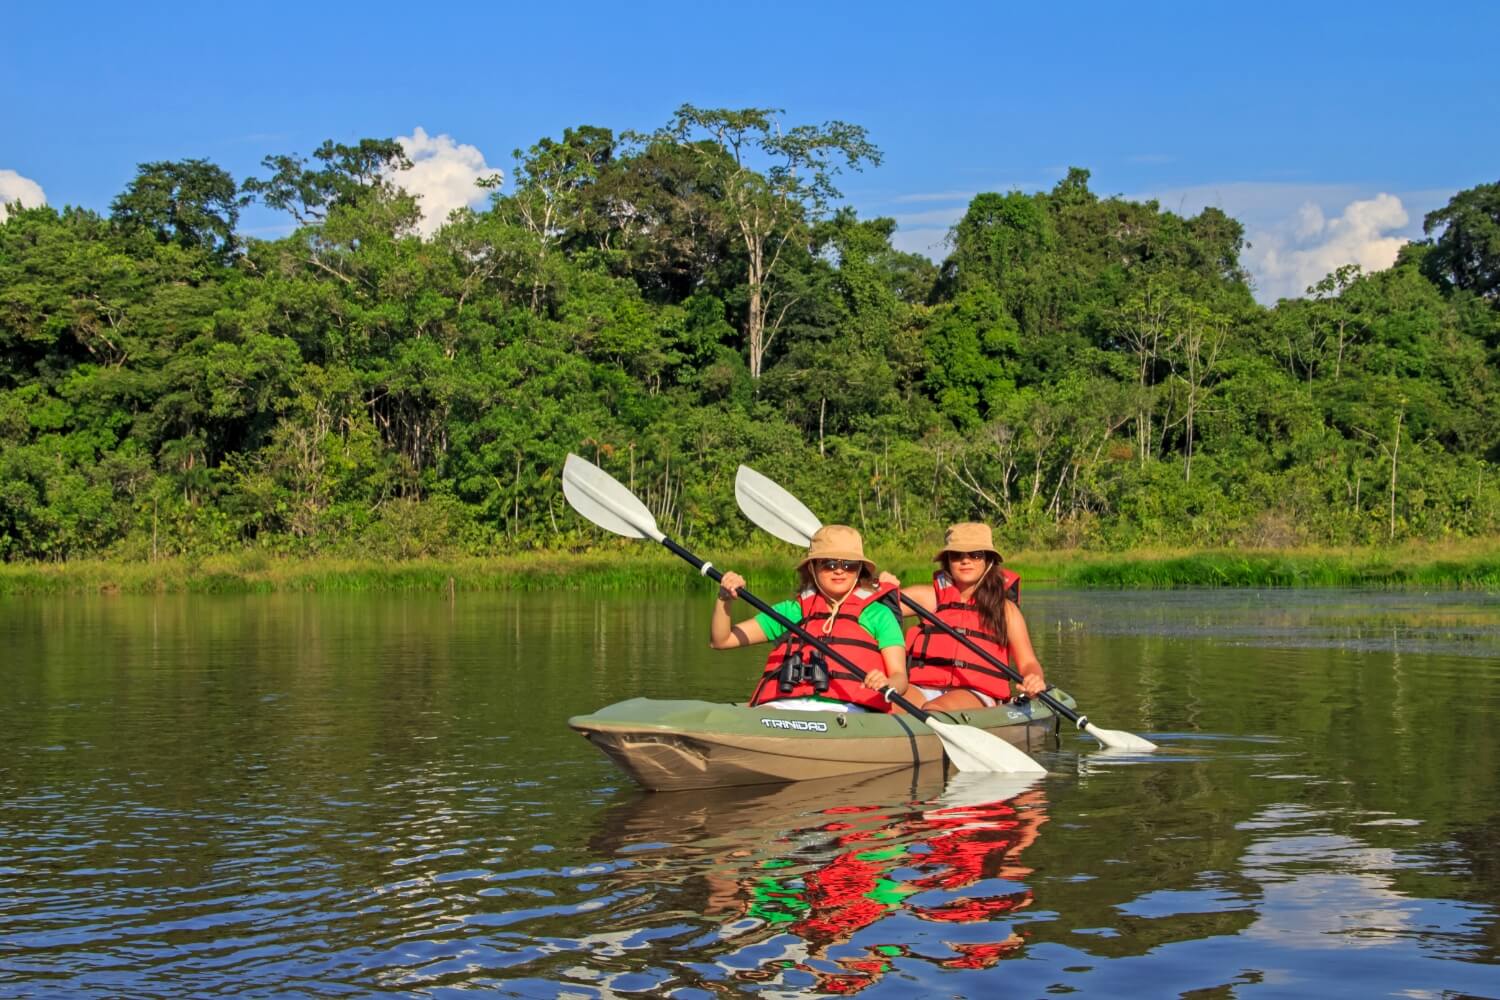 ENJOY A VARIETY OF ACTIVITIES IN THE AMAZON FOREST